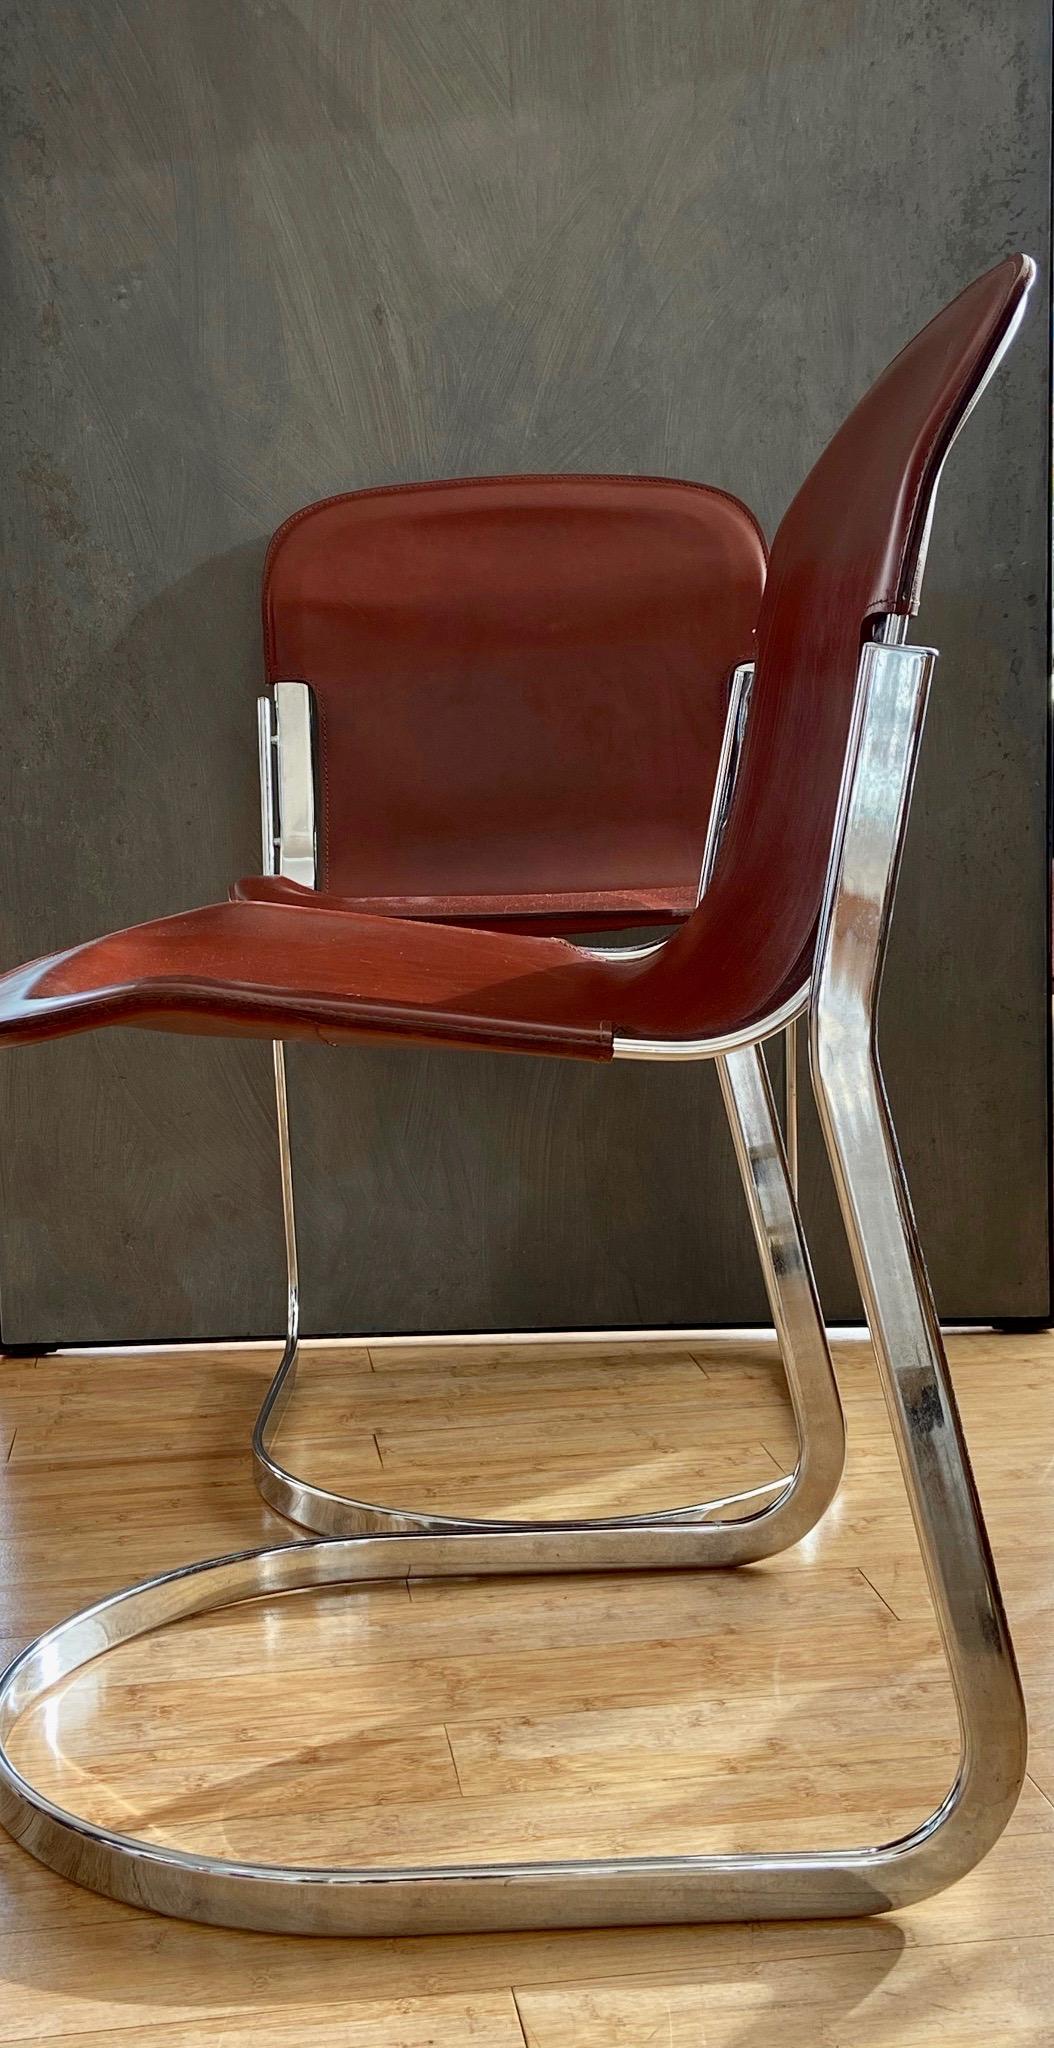 Set of two dining chairs designed by Willy Rizzo for Cidue. Elegant chrome frame and original cognac saddle leather.